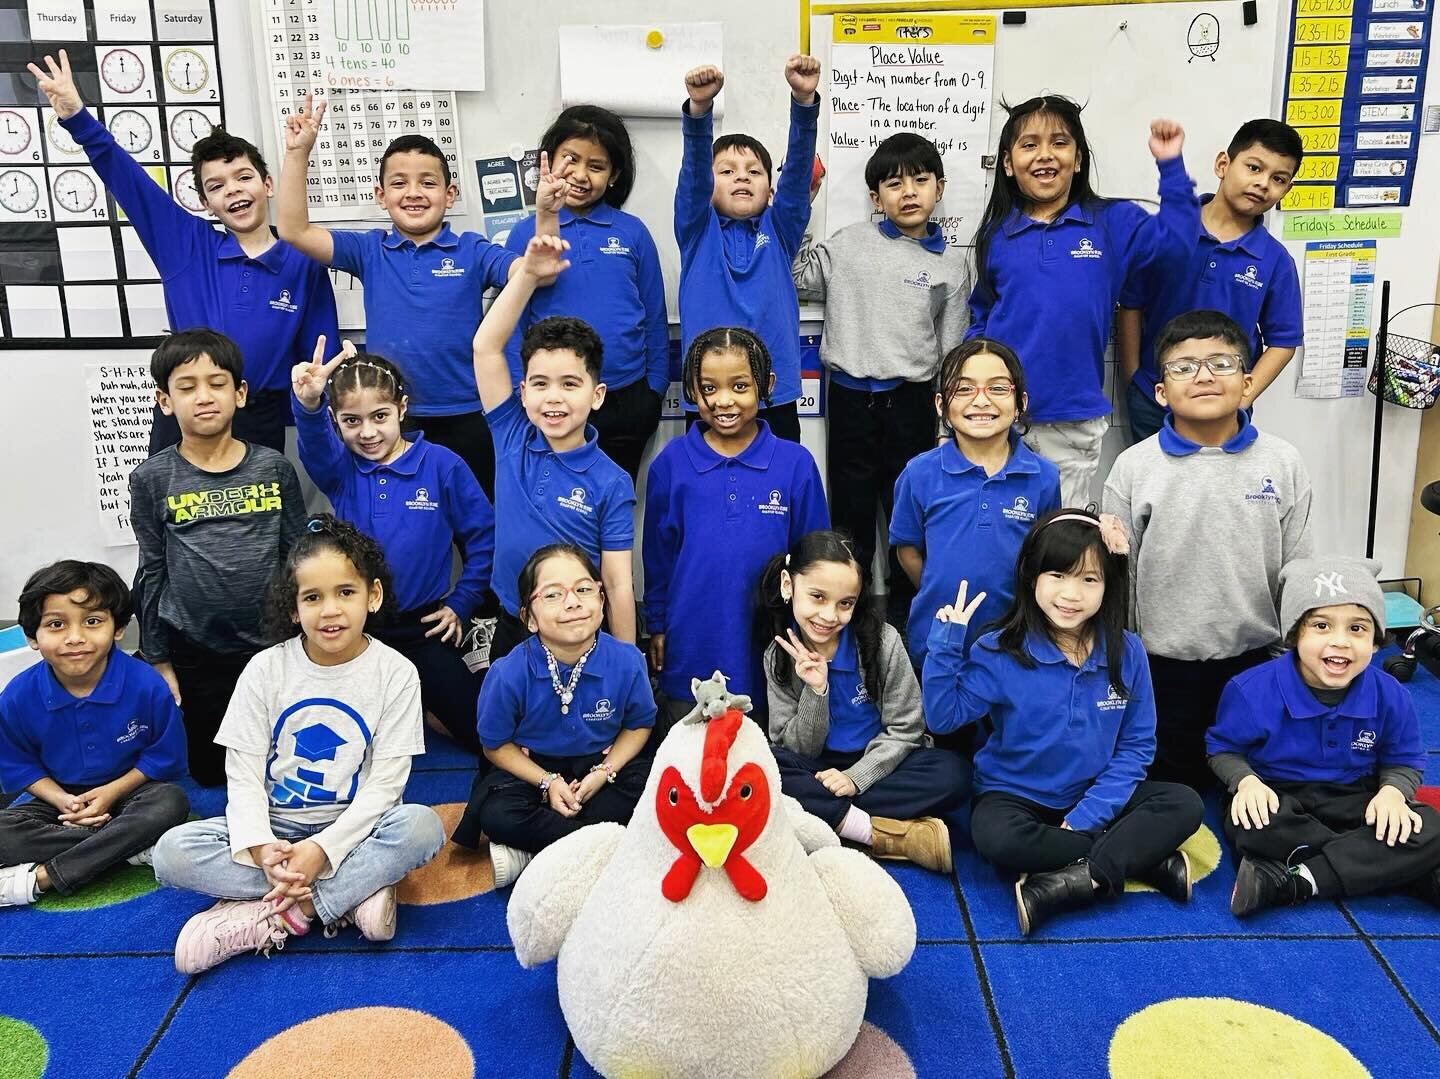 This #WonderfulWednesday is brought to you by the smilies of our amazing Brooklyn RISE students 😁
.
Our kiddos know how to put the JOY in joyful - whether they are winning Remi the Rooster at Community Circle for showing the most school spirit, goin